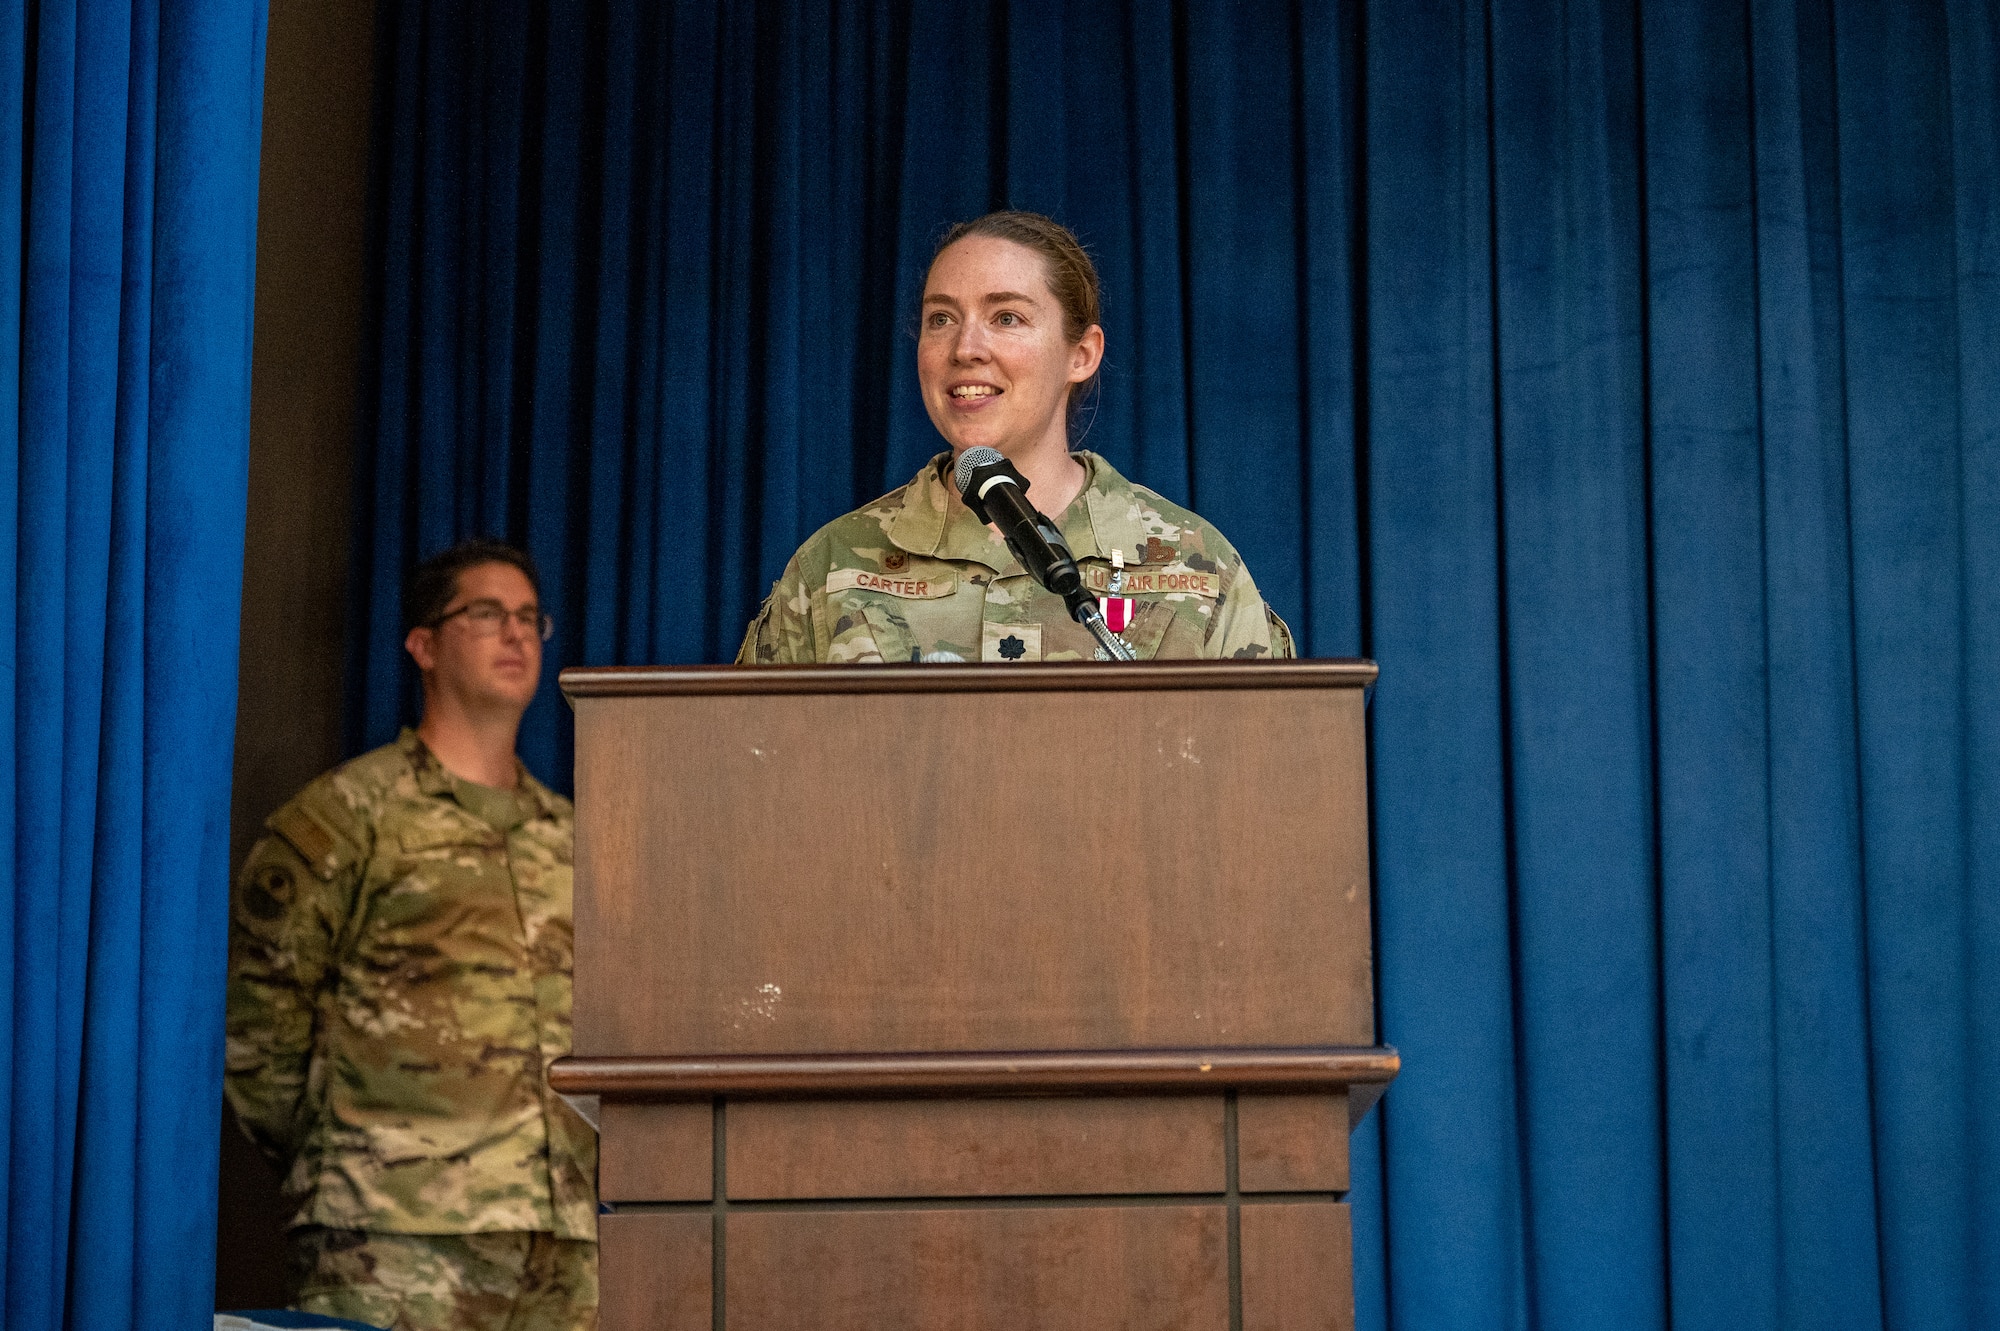 U.S. Air Force Lt. Col. Laura Carter, 6th Intelligence Squadron outgoing commander, provides a final speech to her squadron during the 6th IS change of command ceremony at Osan Air Base, Republic of Korea, June 14, 2023. Lt. Col. Adam Fossum took command of the 6th IS during the ceremony. (U.S. Air Force photo by Senior Airman Thomas Sjoberg)